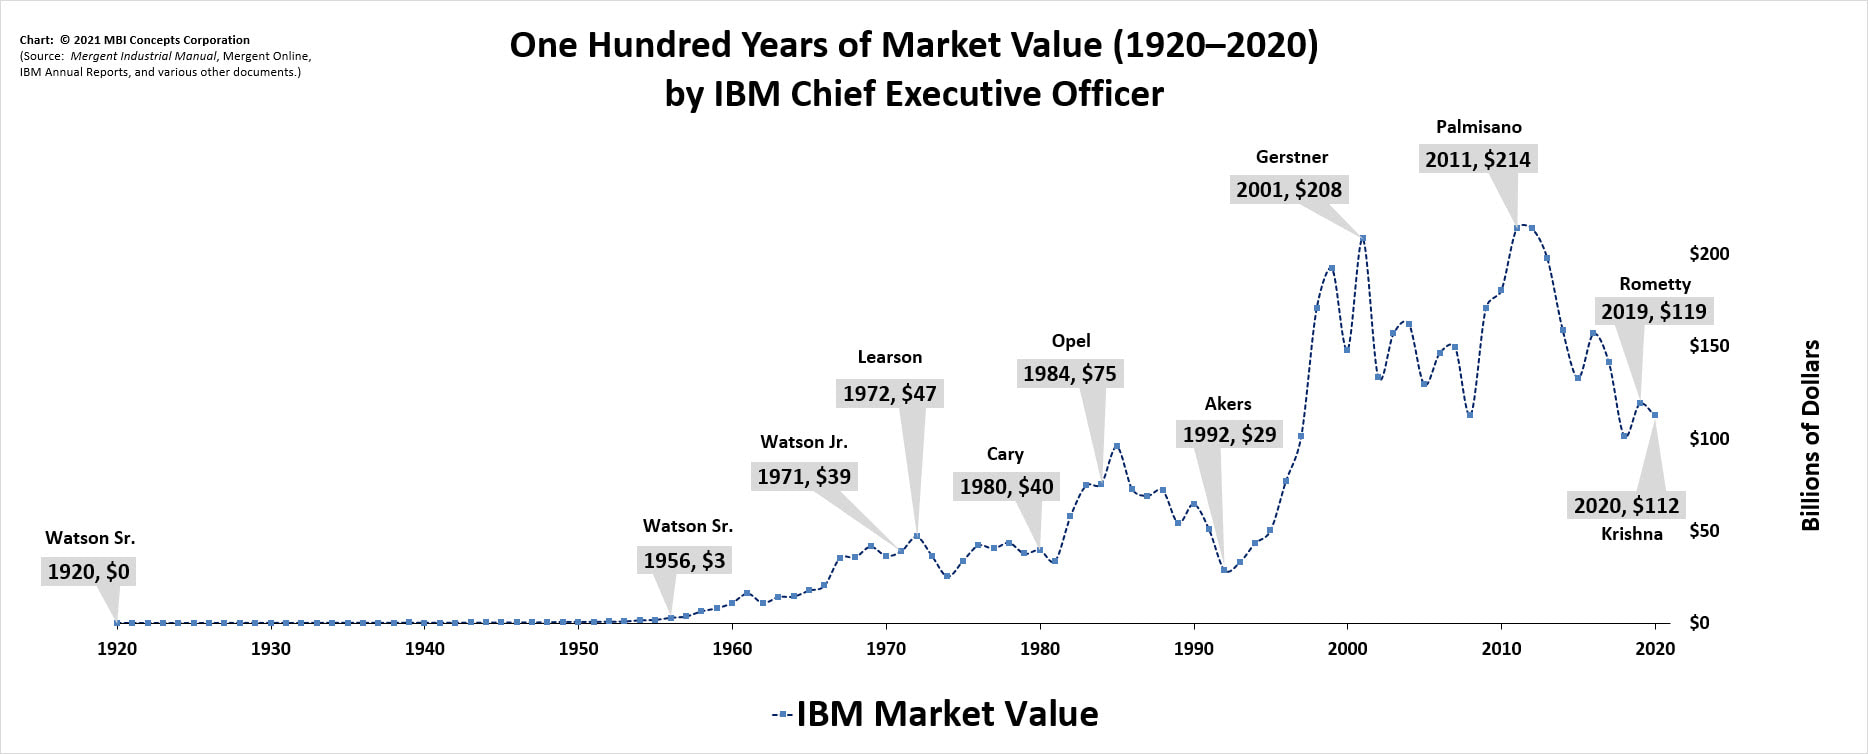 A color bar chart showing IBM's yearly market value from 1920 to 2020 by Chief Executive Officer (CEO): Thomas J. Watson Sr., Thomas J. Watson Jr., T. Vincent (Vin) Learson, Frank T. Cary, John R. Opel, John F. Akers, Louis V. (Lou) Gerstner, Samuel J. (Sam) Palmisano, Virginia M. (Ginni) Rometty, and Arvind Krishna.